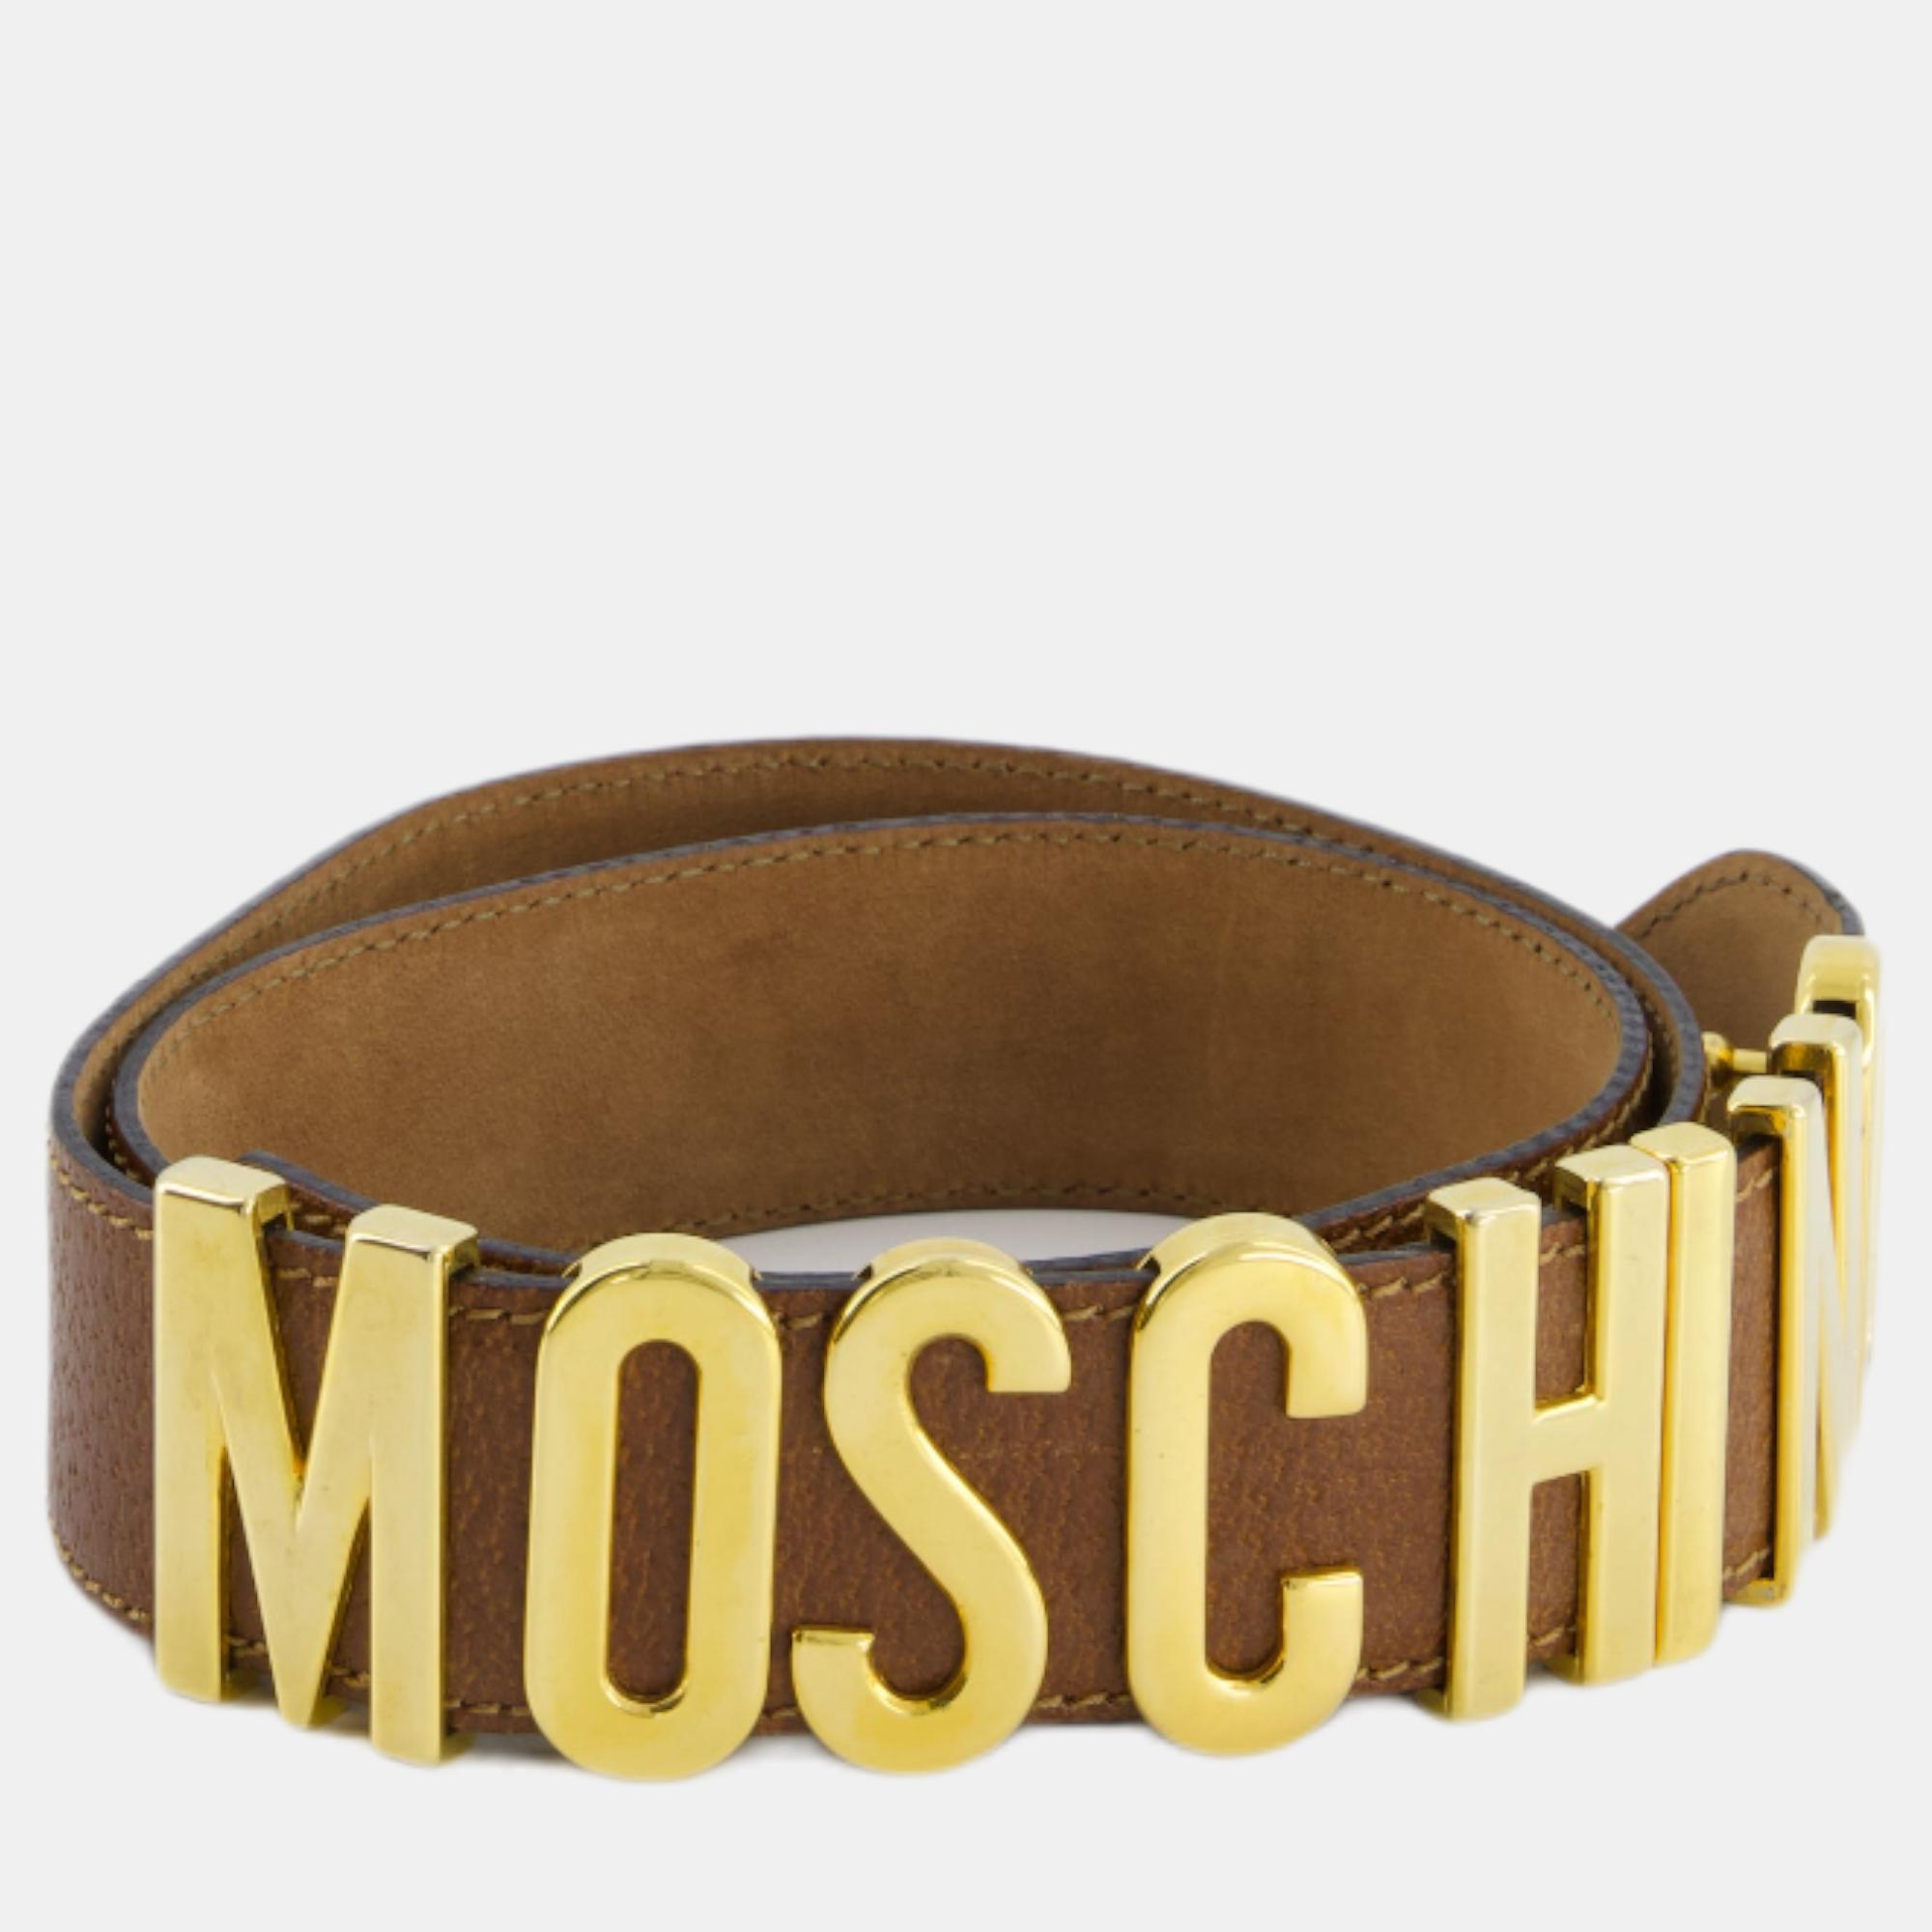 Moschino Brown Leather Logo Belt With Gold Hardware Size 44 (UK 12)